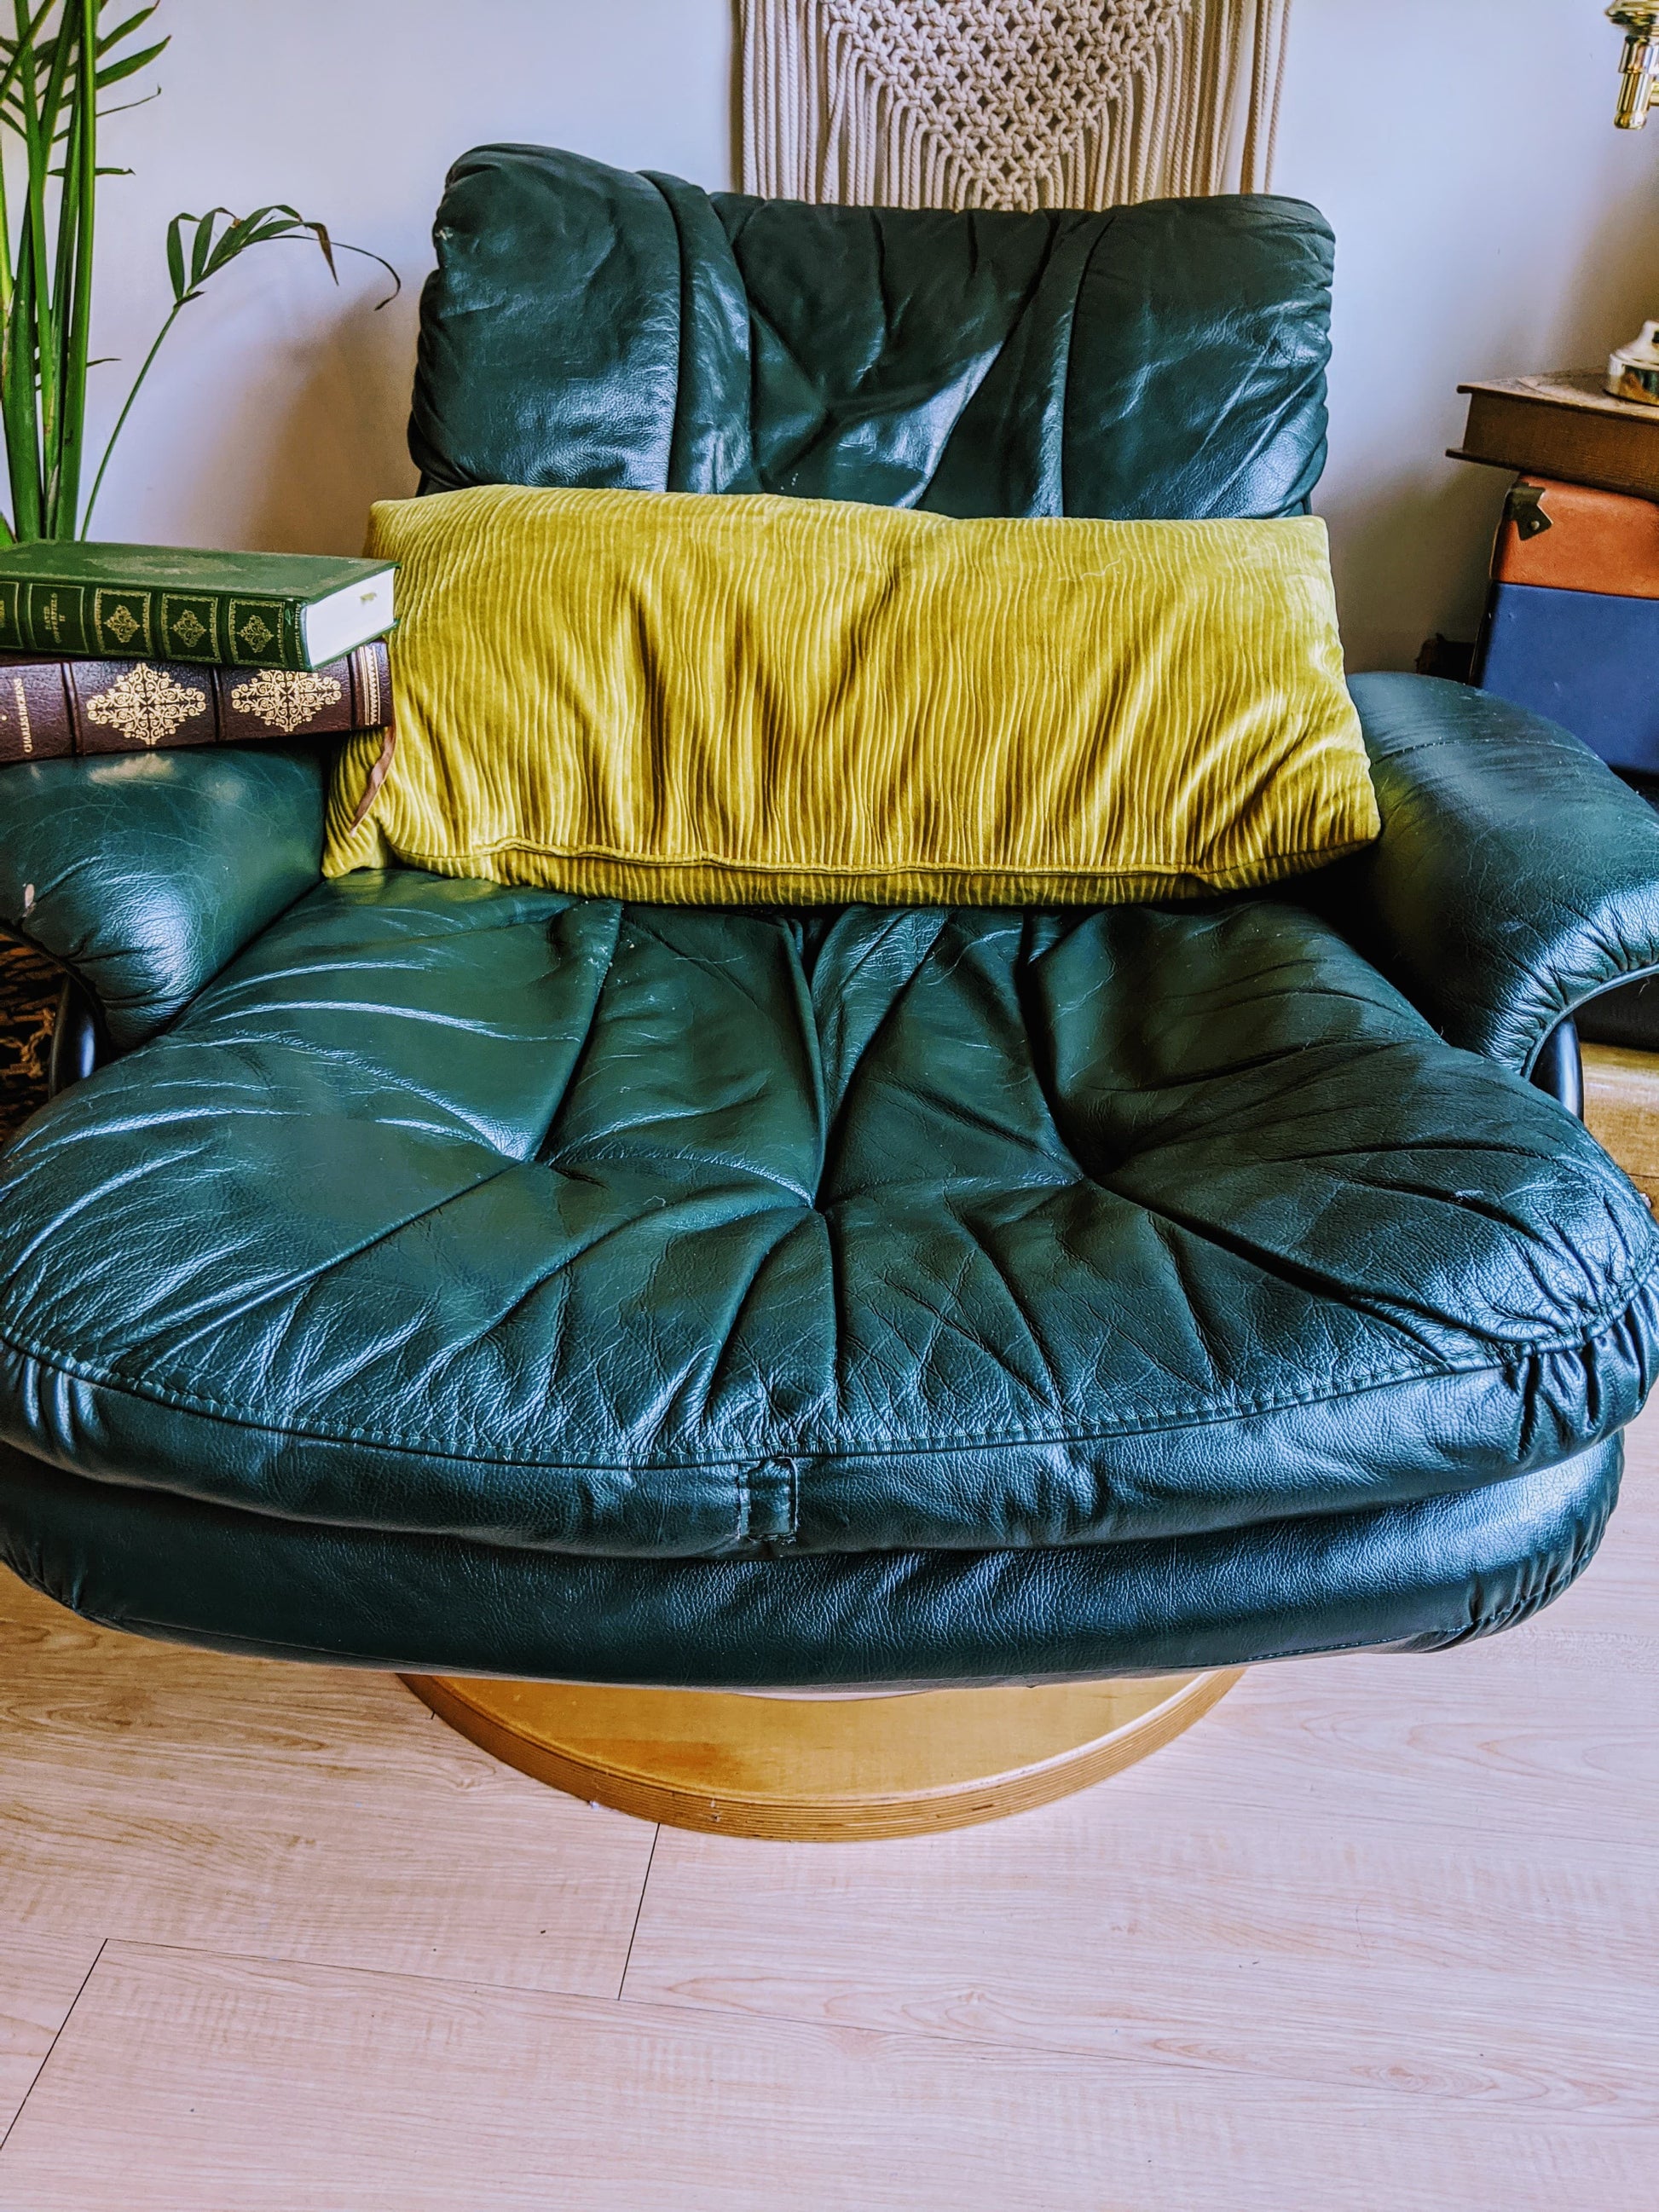 Lazboy chair 80s pine green recliner leather